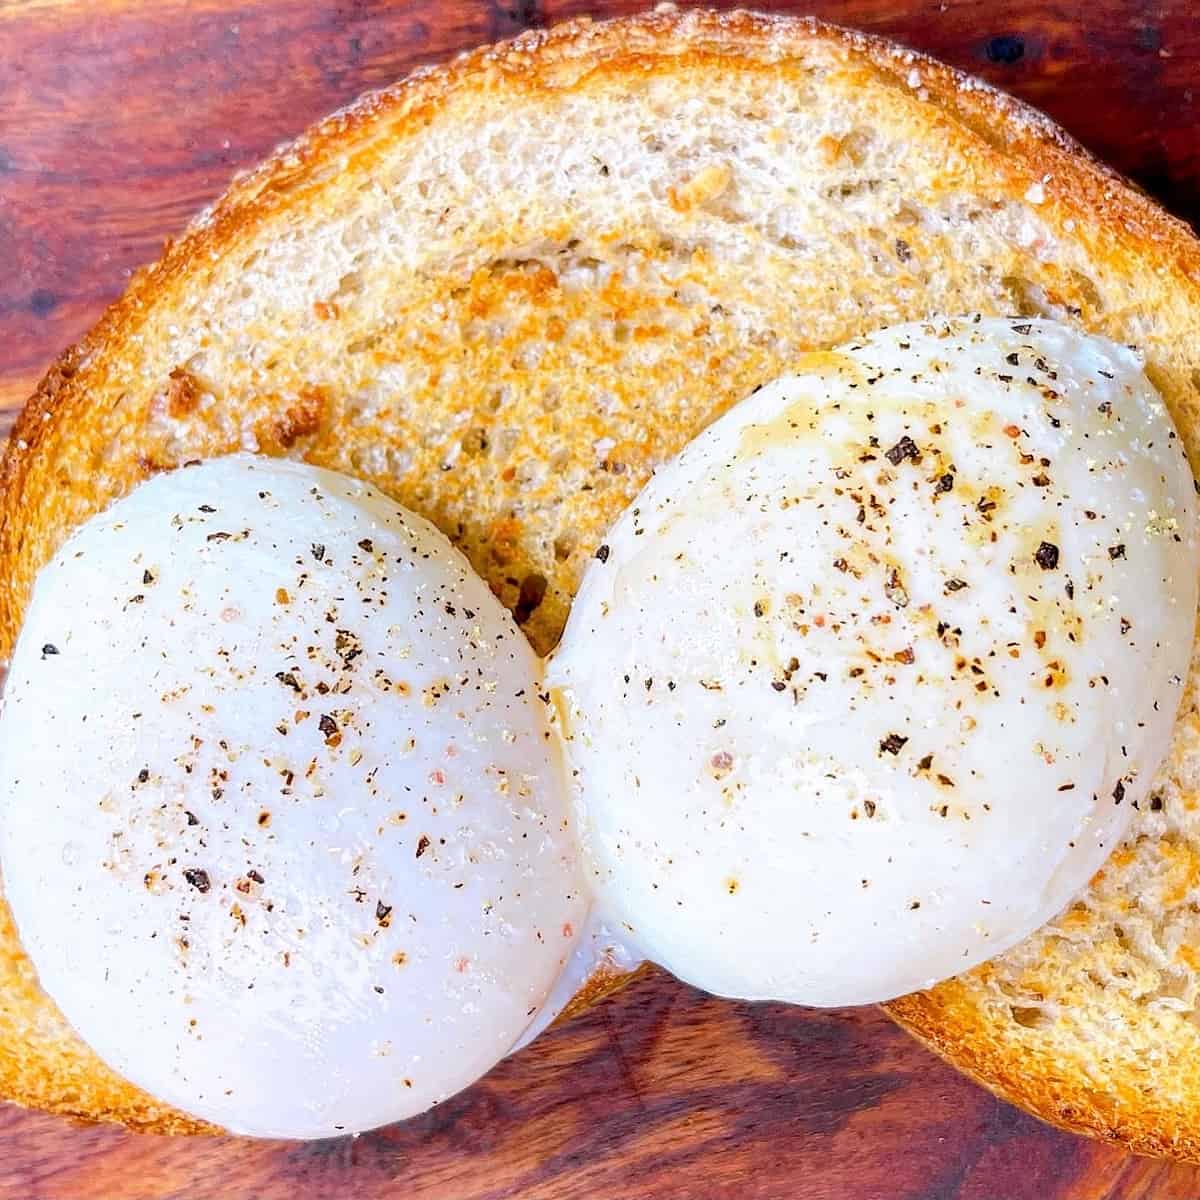 Poached eggs whole on wooden cutting board